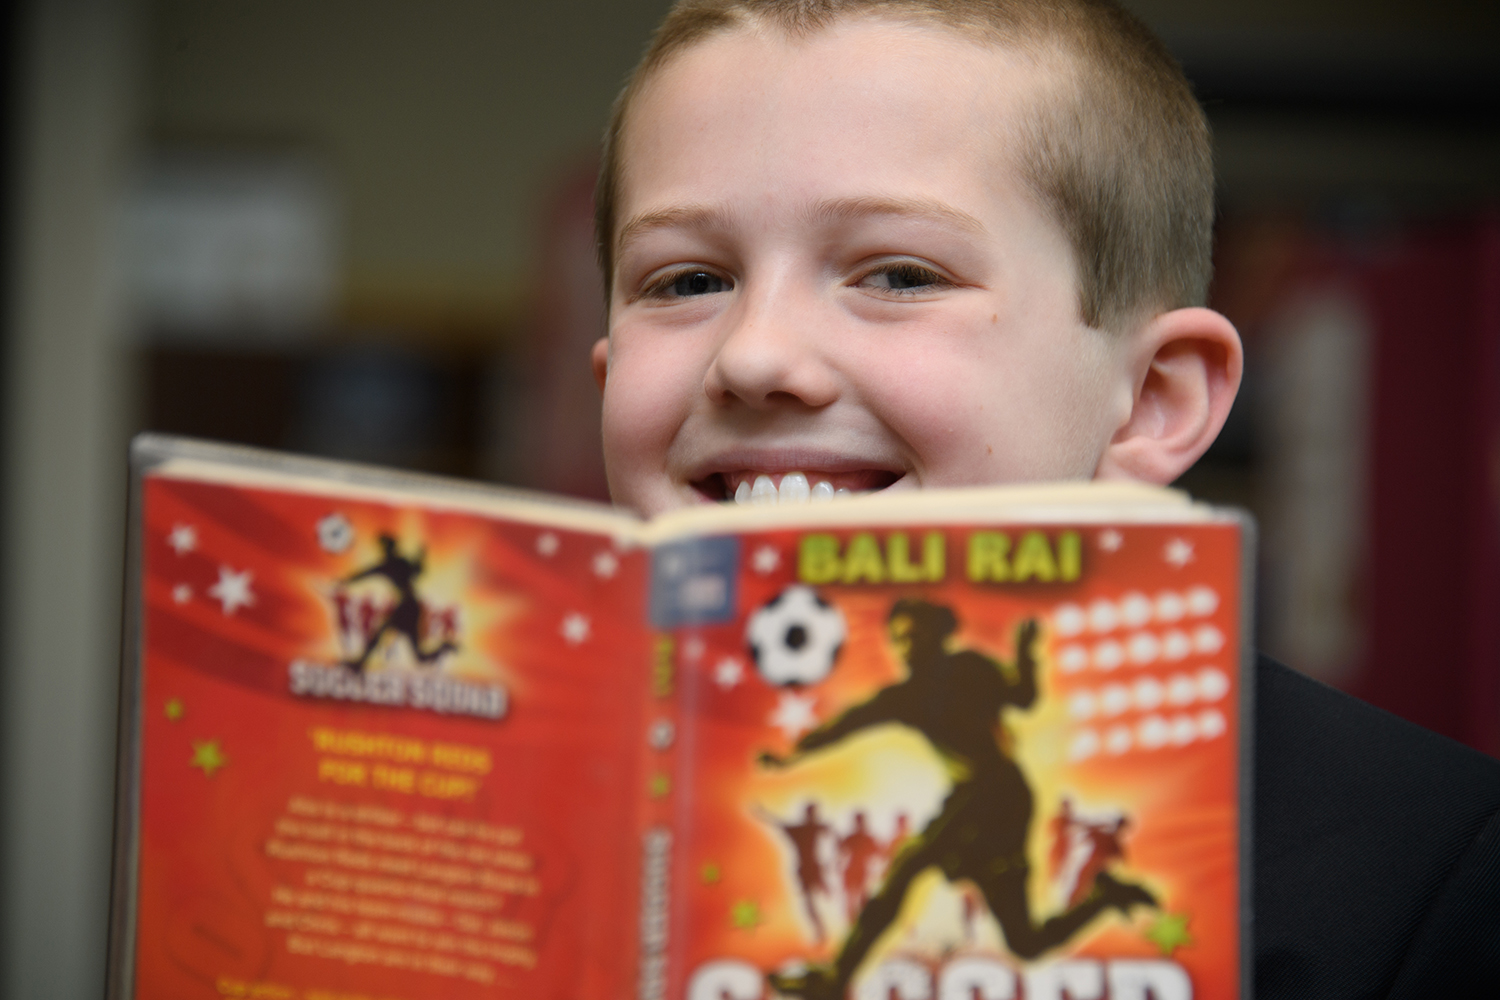 Boy in the library smiling over the top of a book